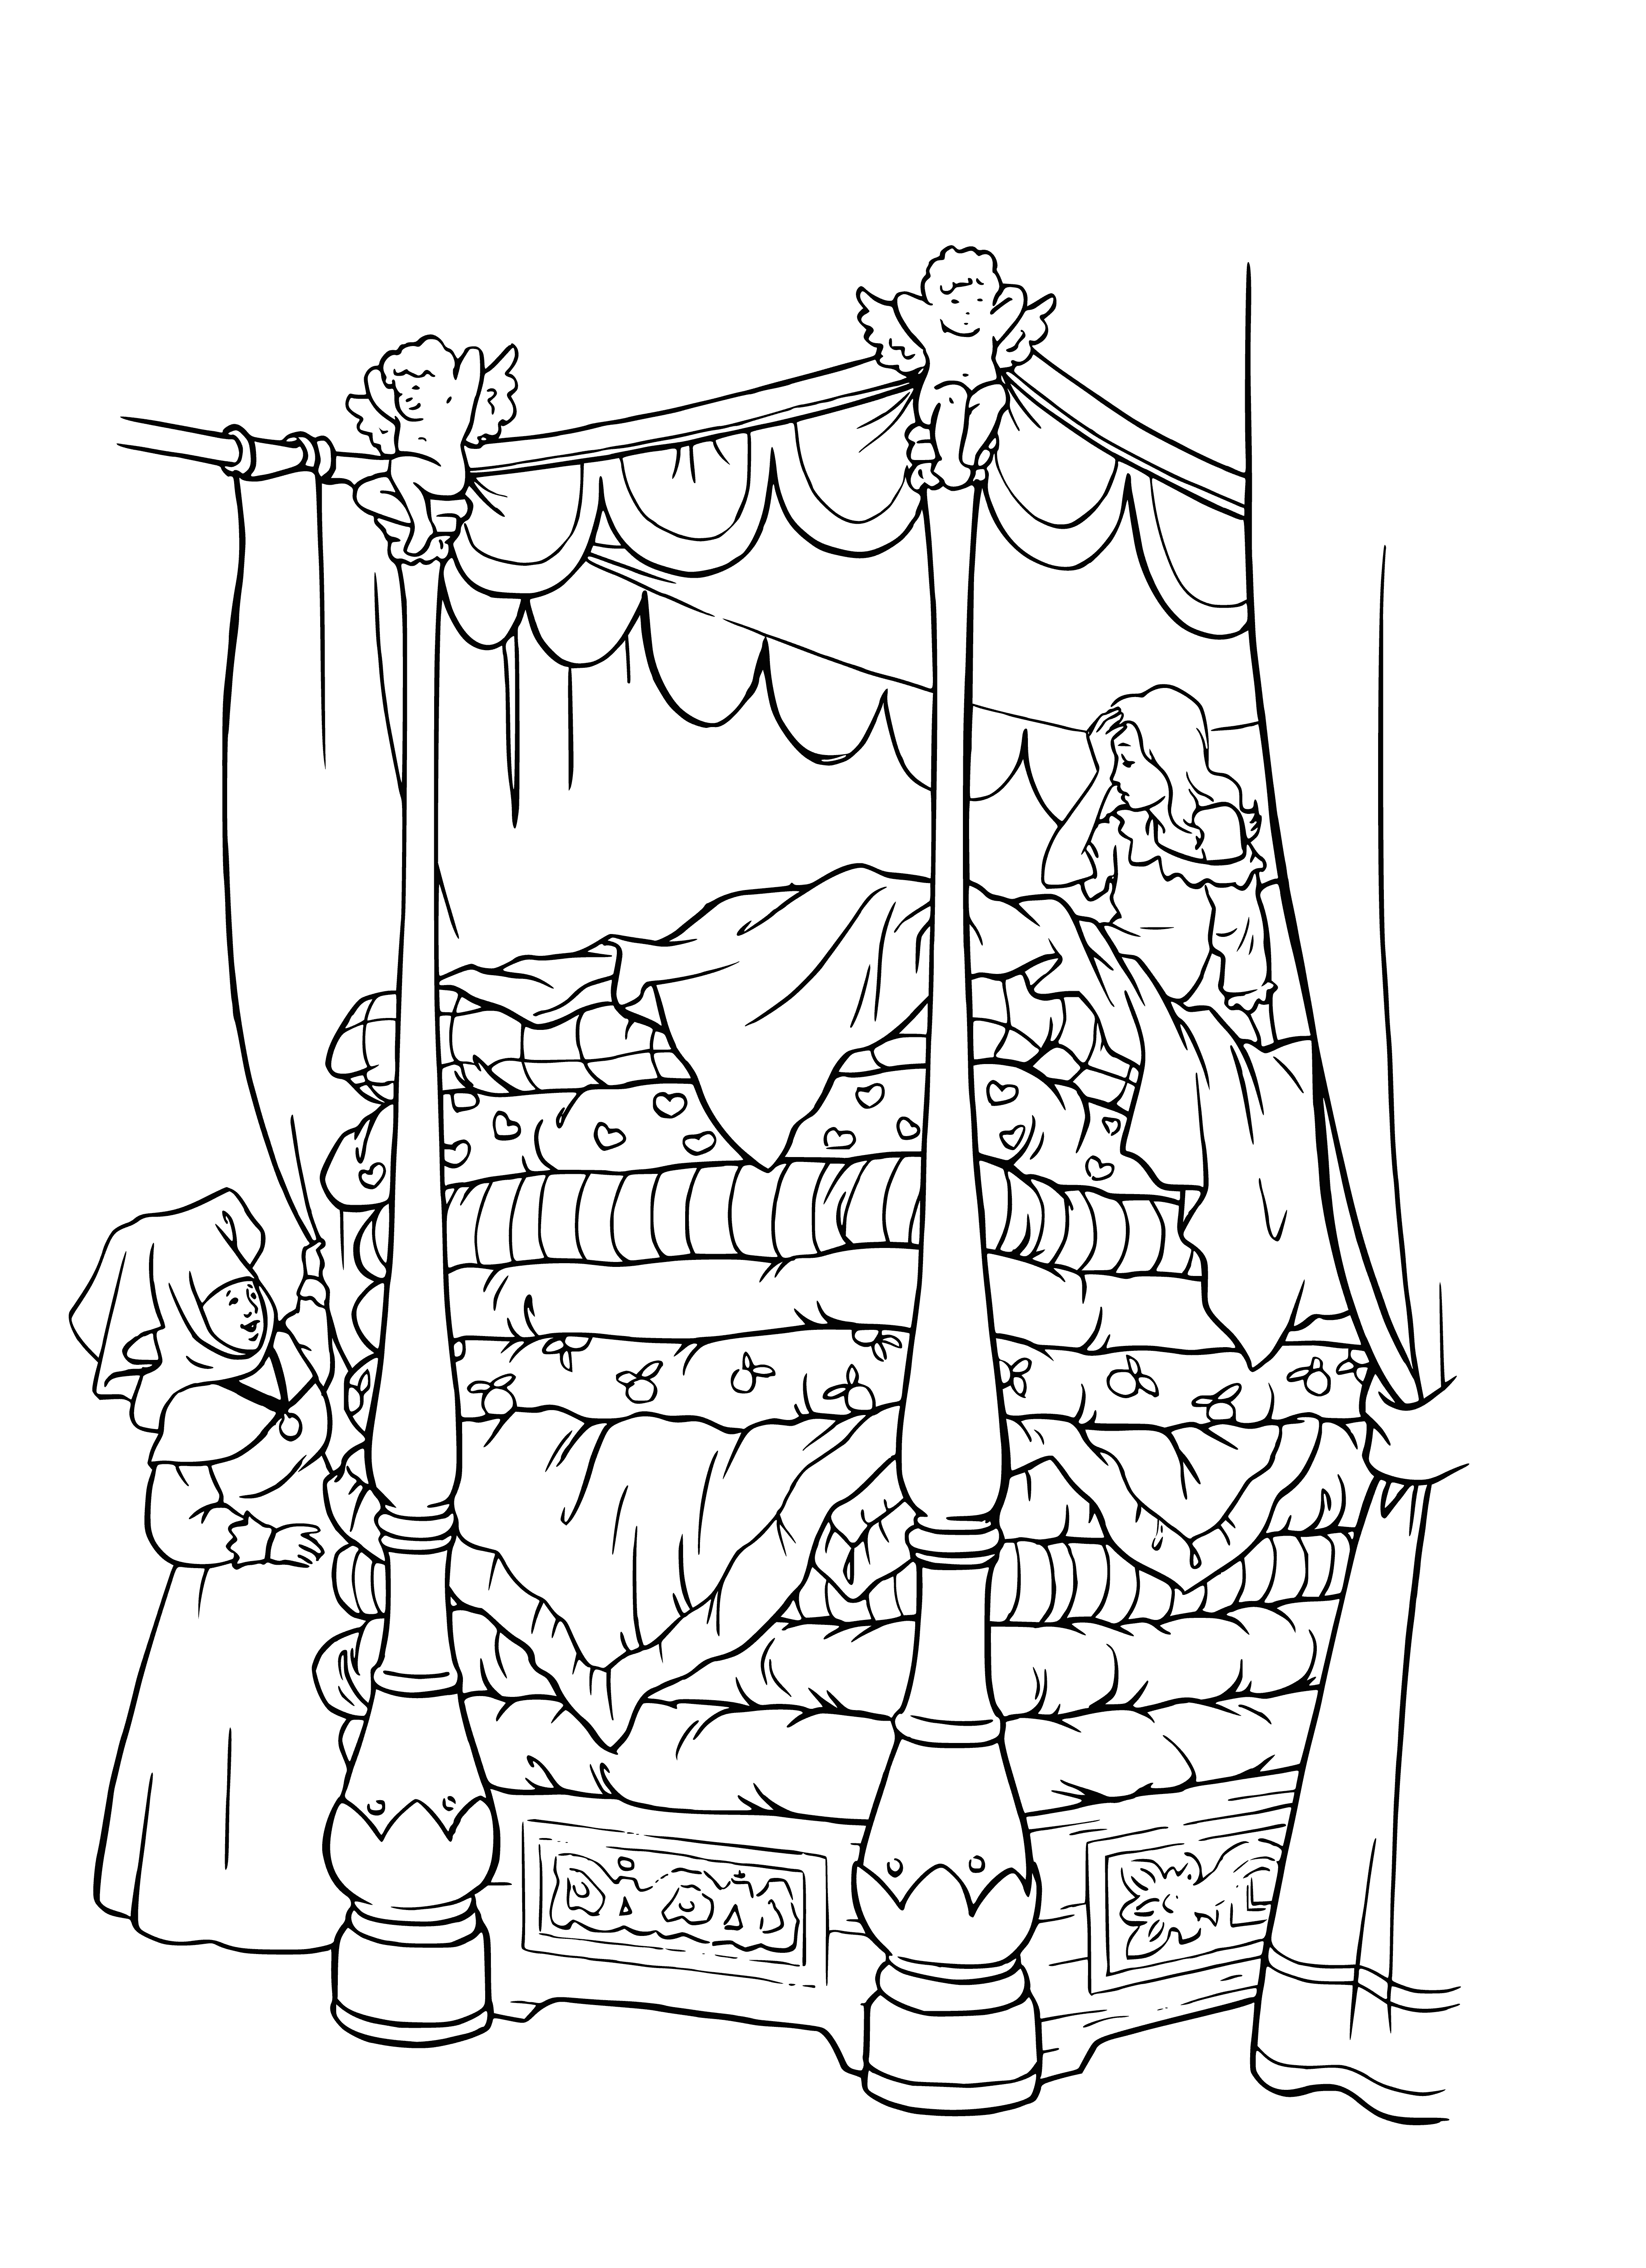 coloring page: Princess stands atop a feathery mountain, looking sadly down at a village beneath her.